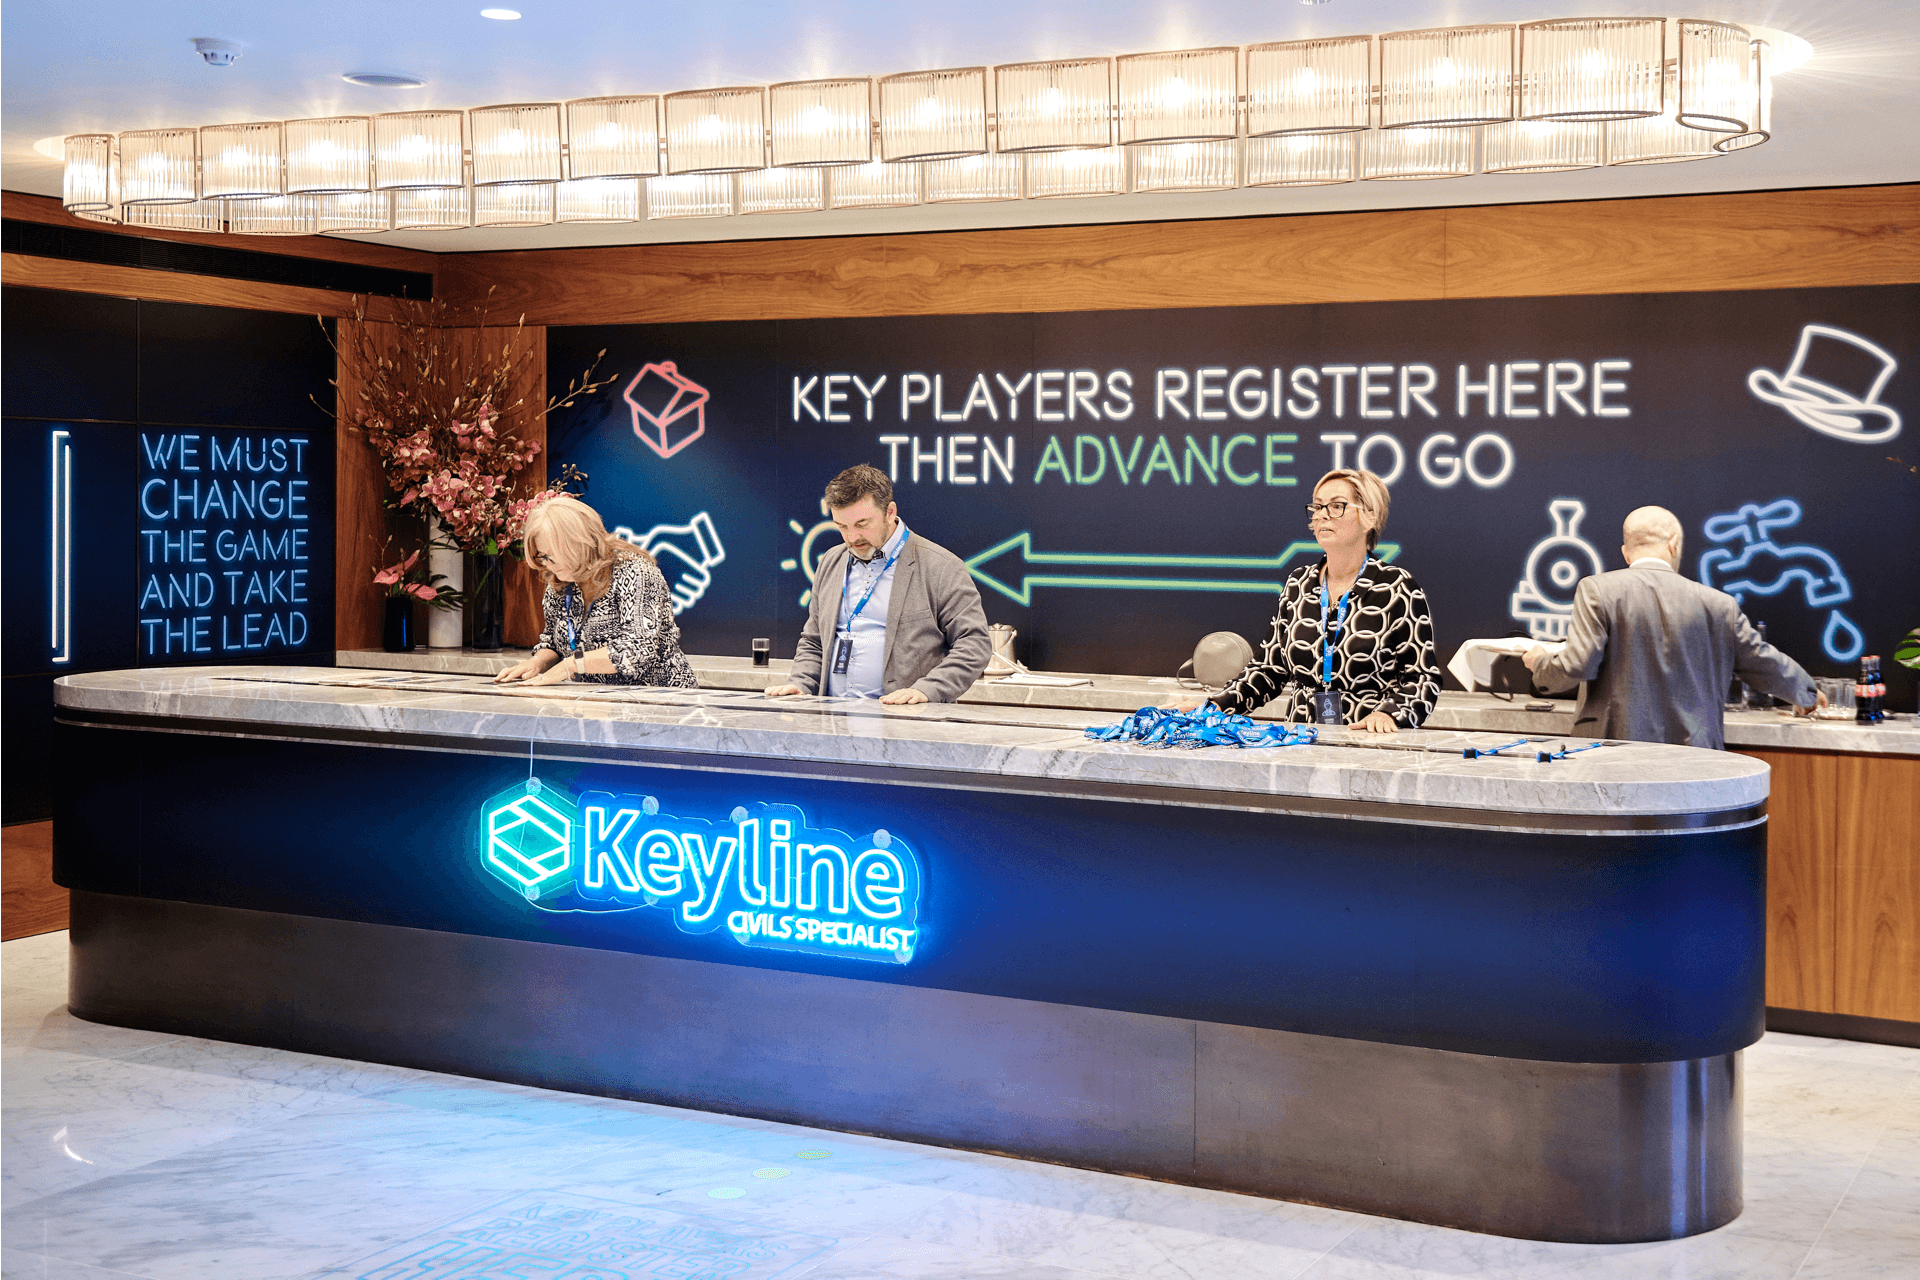 4 individuals stood at the registration desk, ready to help players find their name tags and lanyards